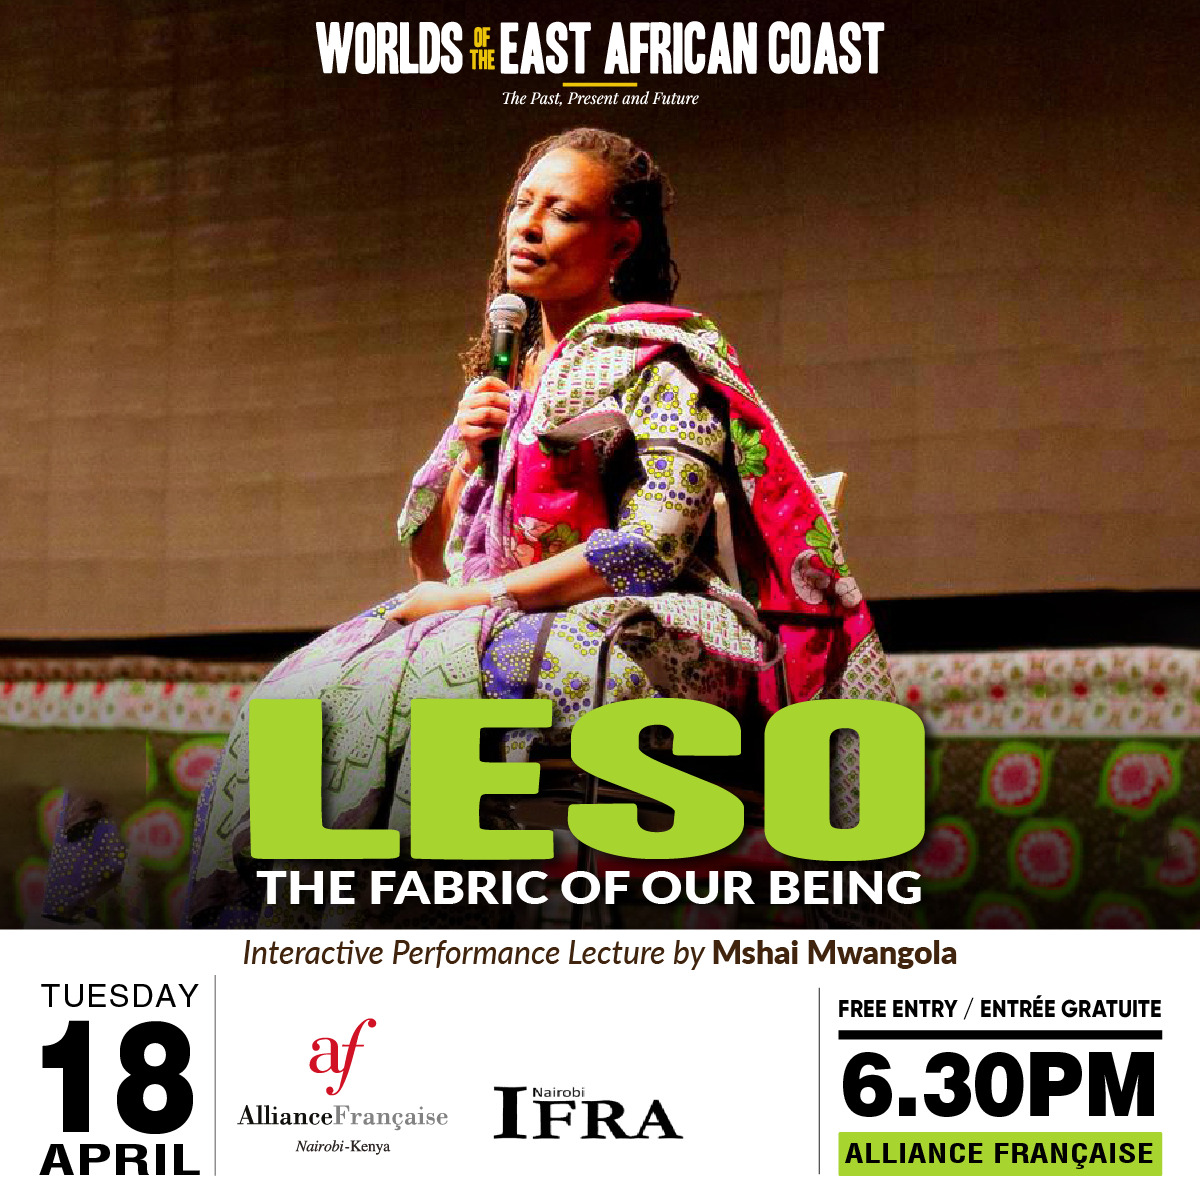 @NgeleAli This was an interesting event on the Leso.